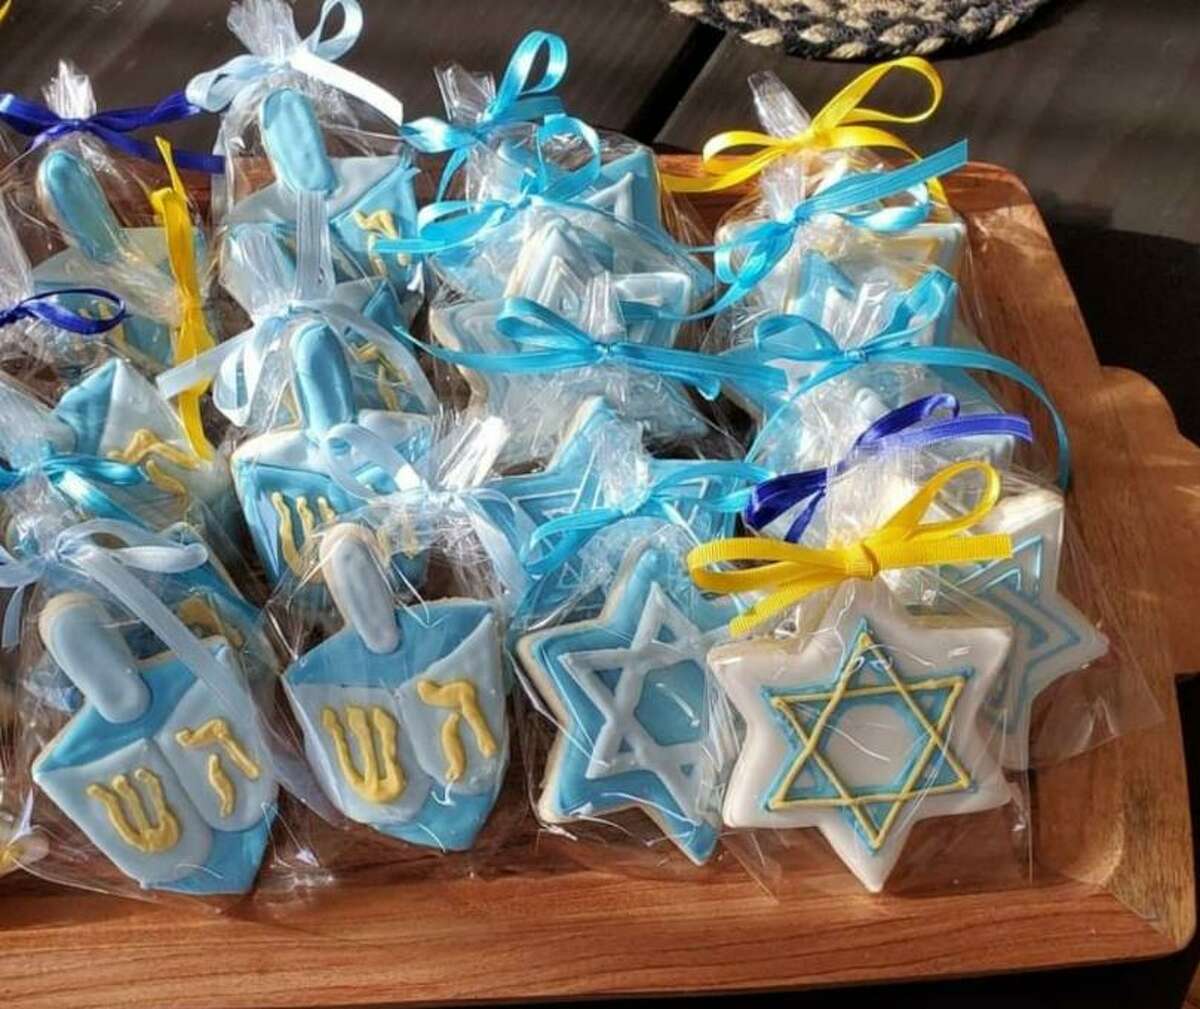 Hanukkah cookies will be available at Emily’s Baking Company’s next pop-up shop Dec. 19.